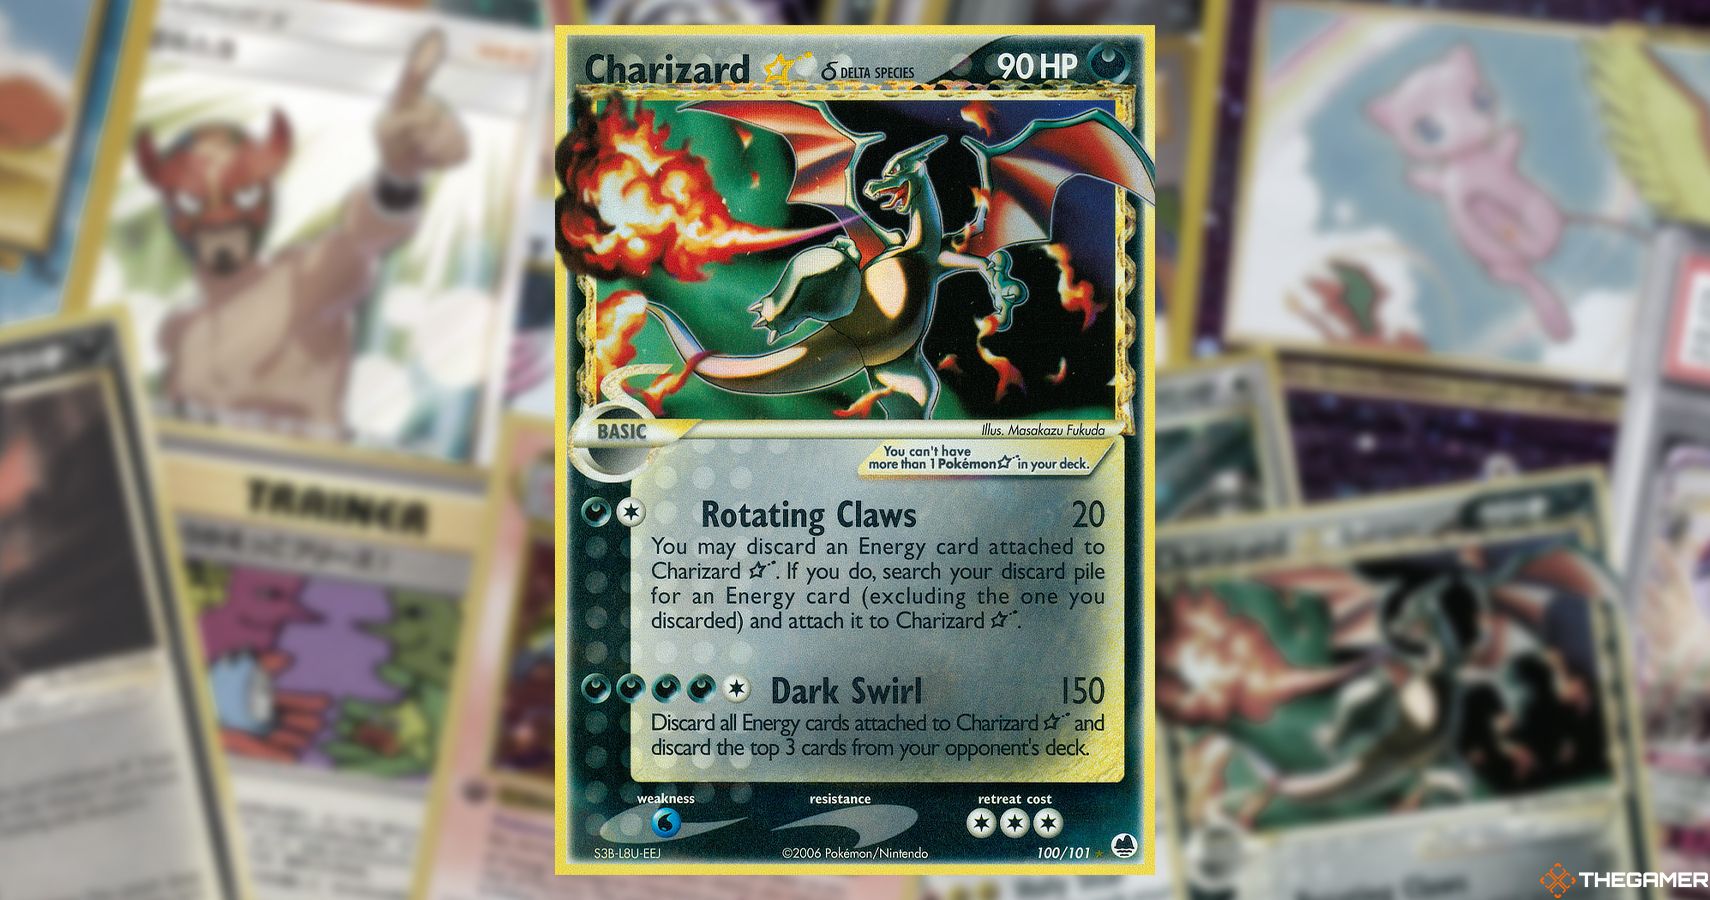 The 25 Rarest Pokemon Cards And What They're Worth, Ranked